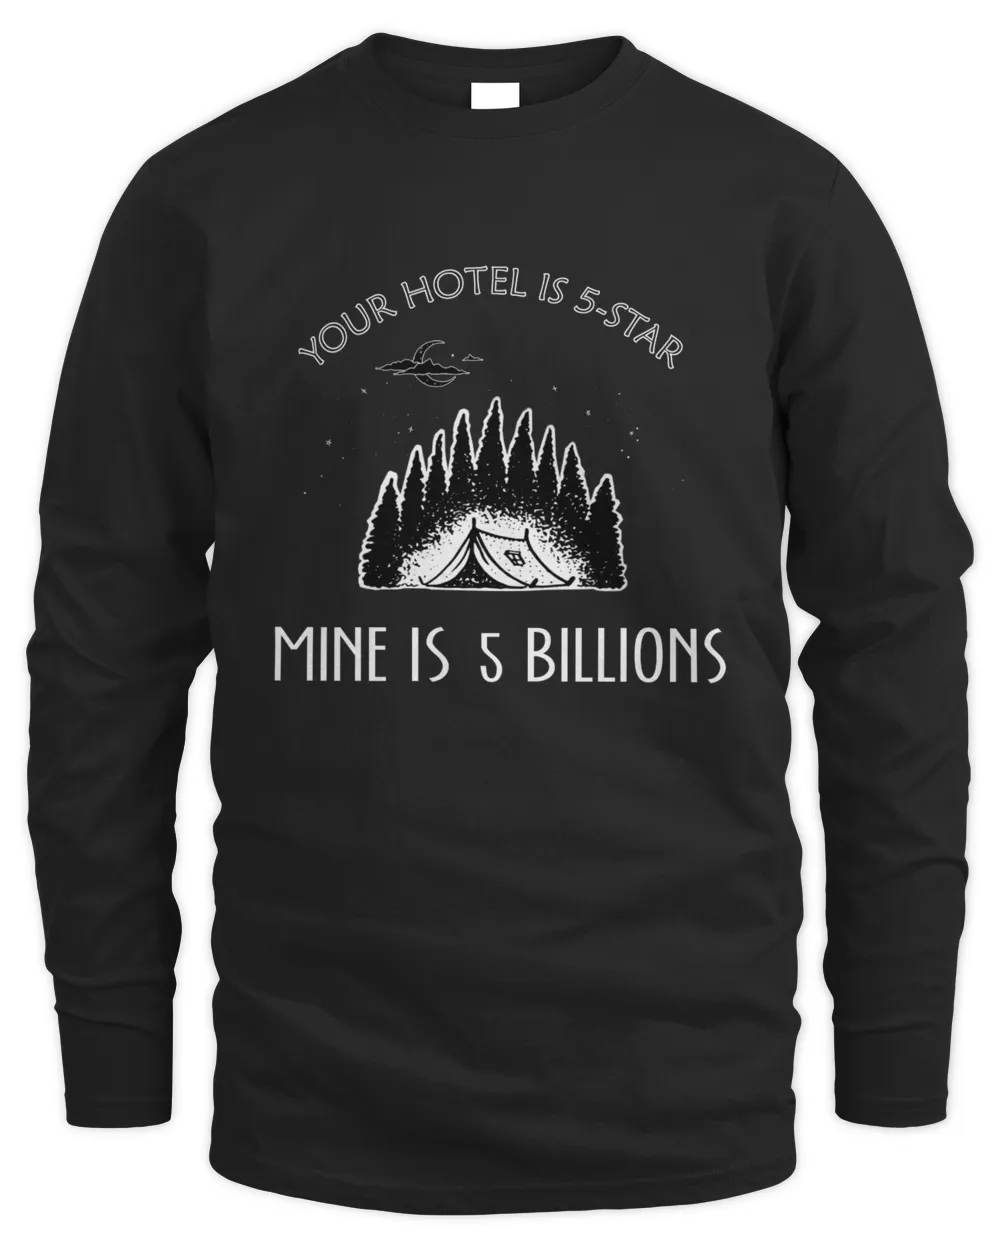 YOUR HOTEL IS 5-STAR (black _ white)